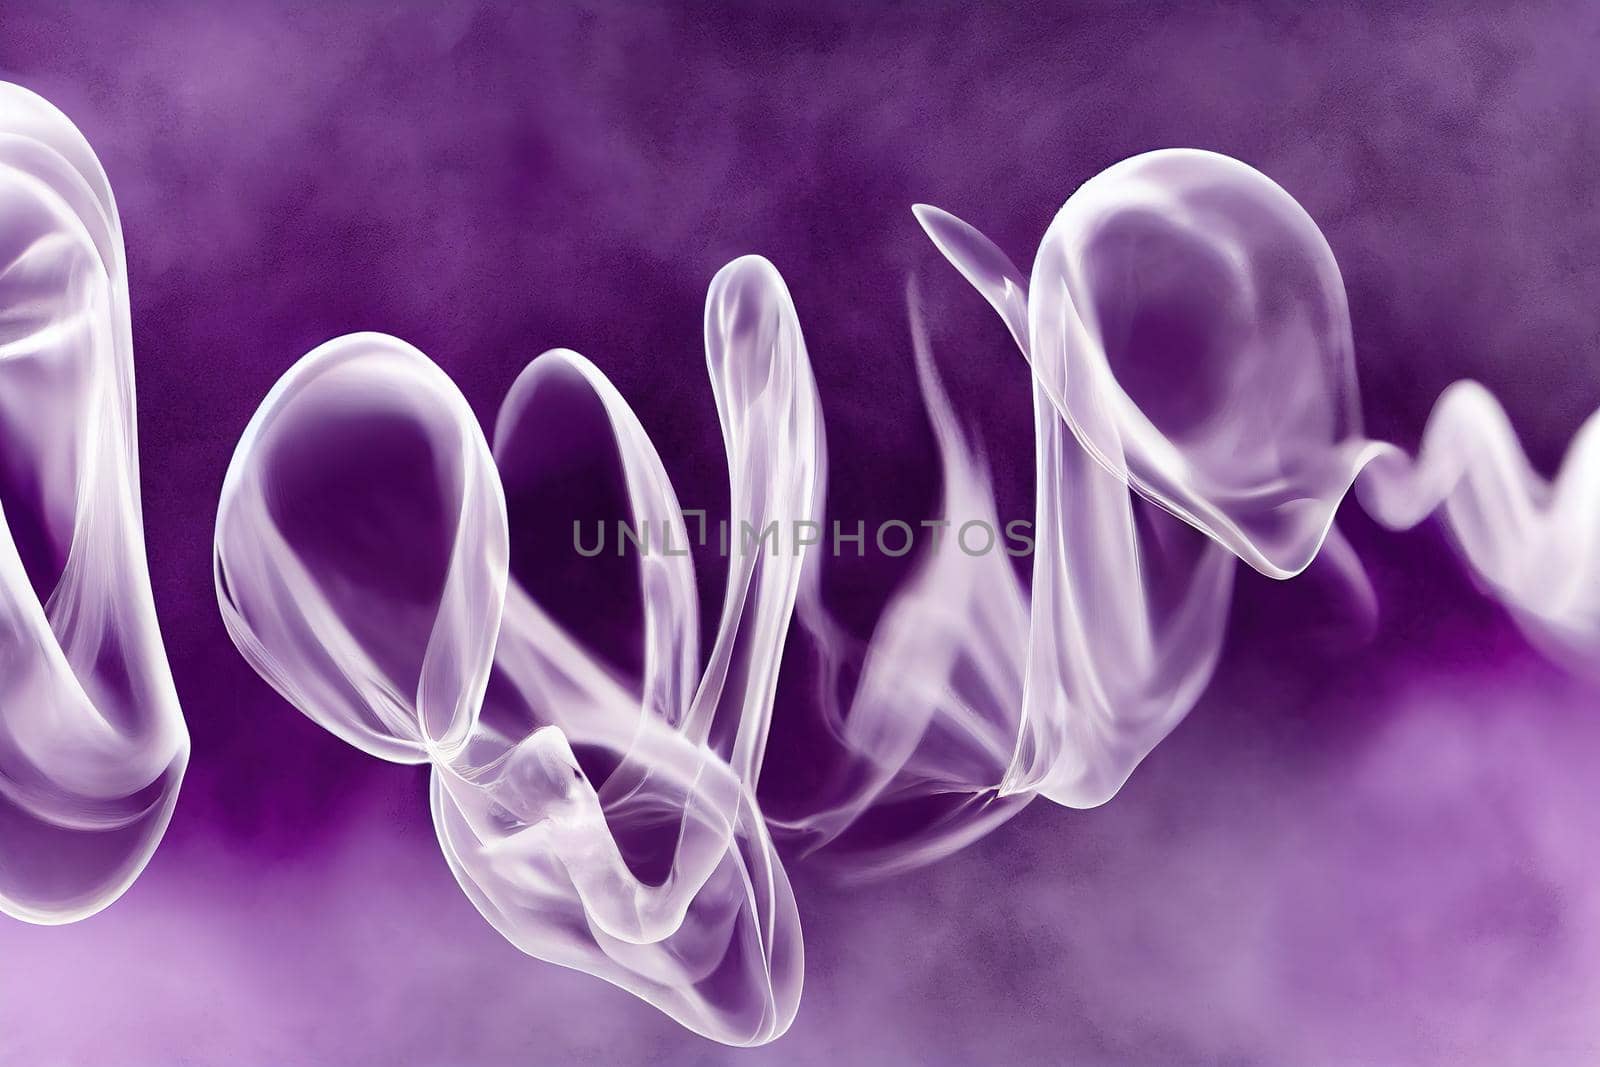 Evaporation liquify text on purple abstract background. High quality illustration